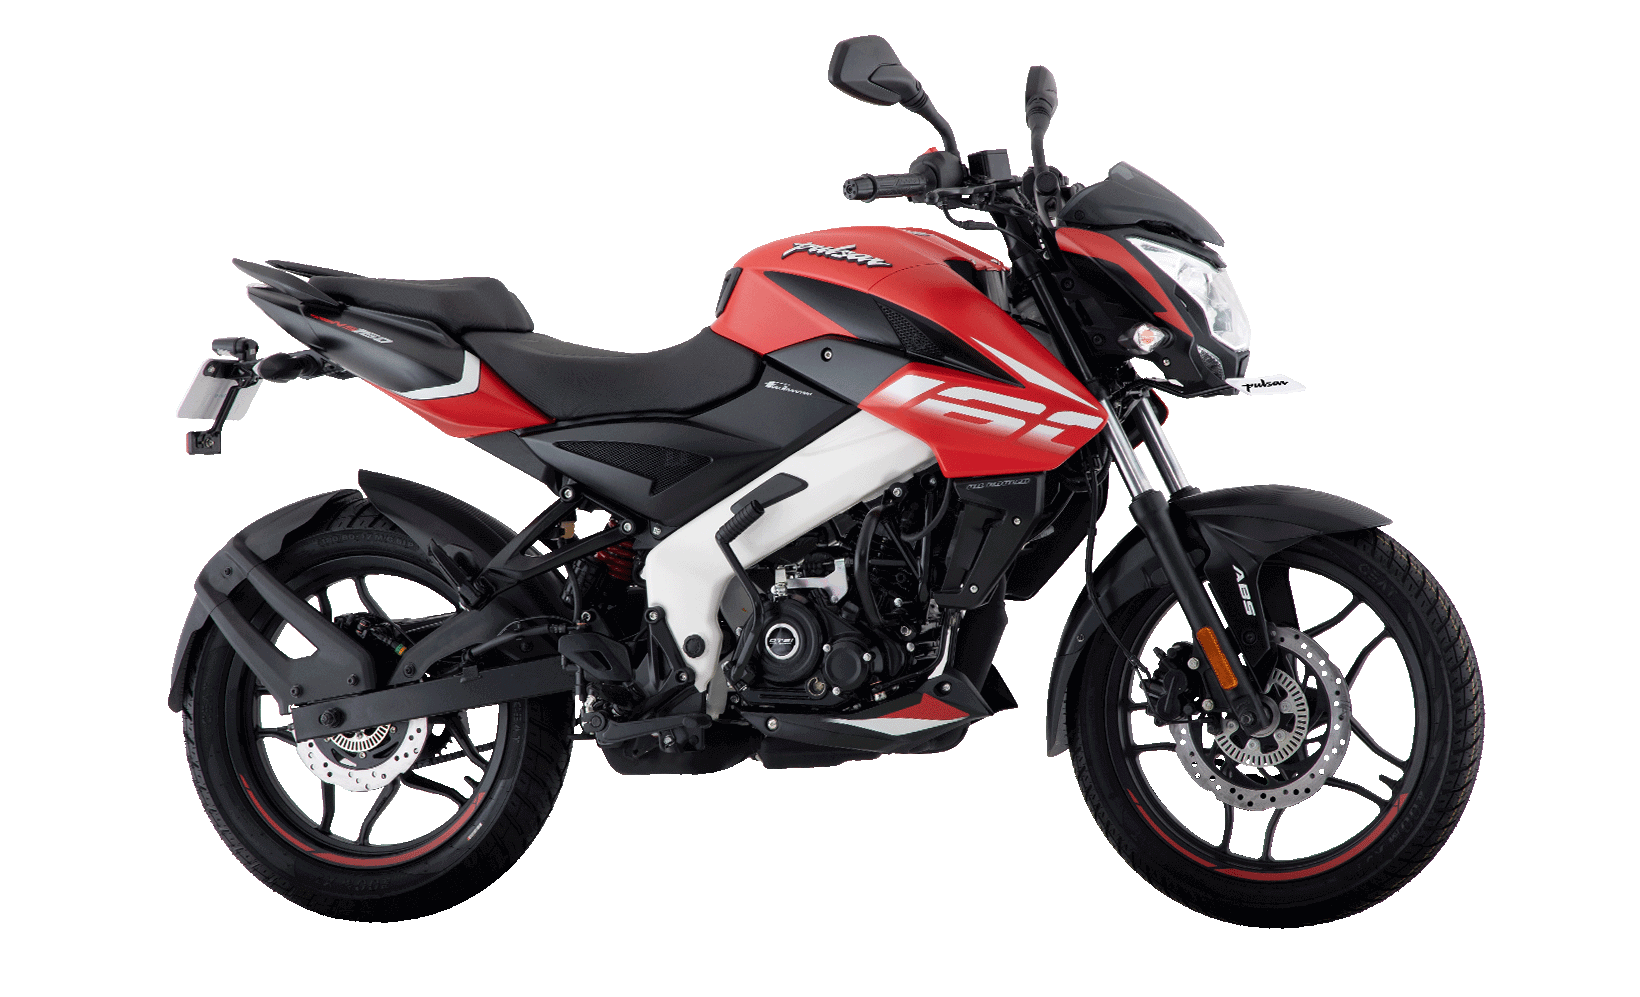 Black and Red Bajaj Pulsar NS 160cc Twin Disk ABS Motorcycle